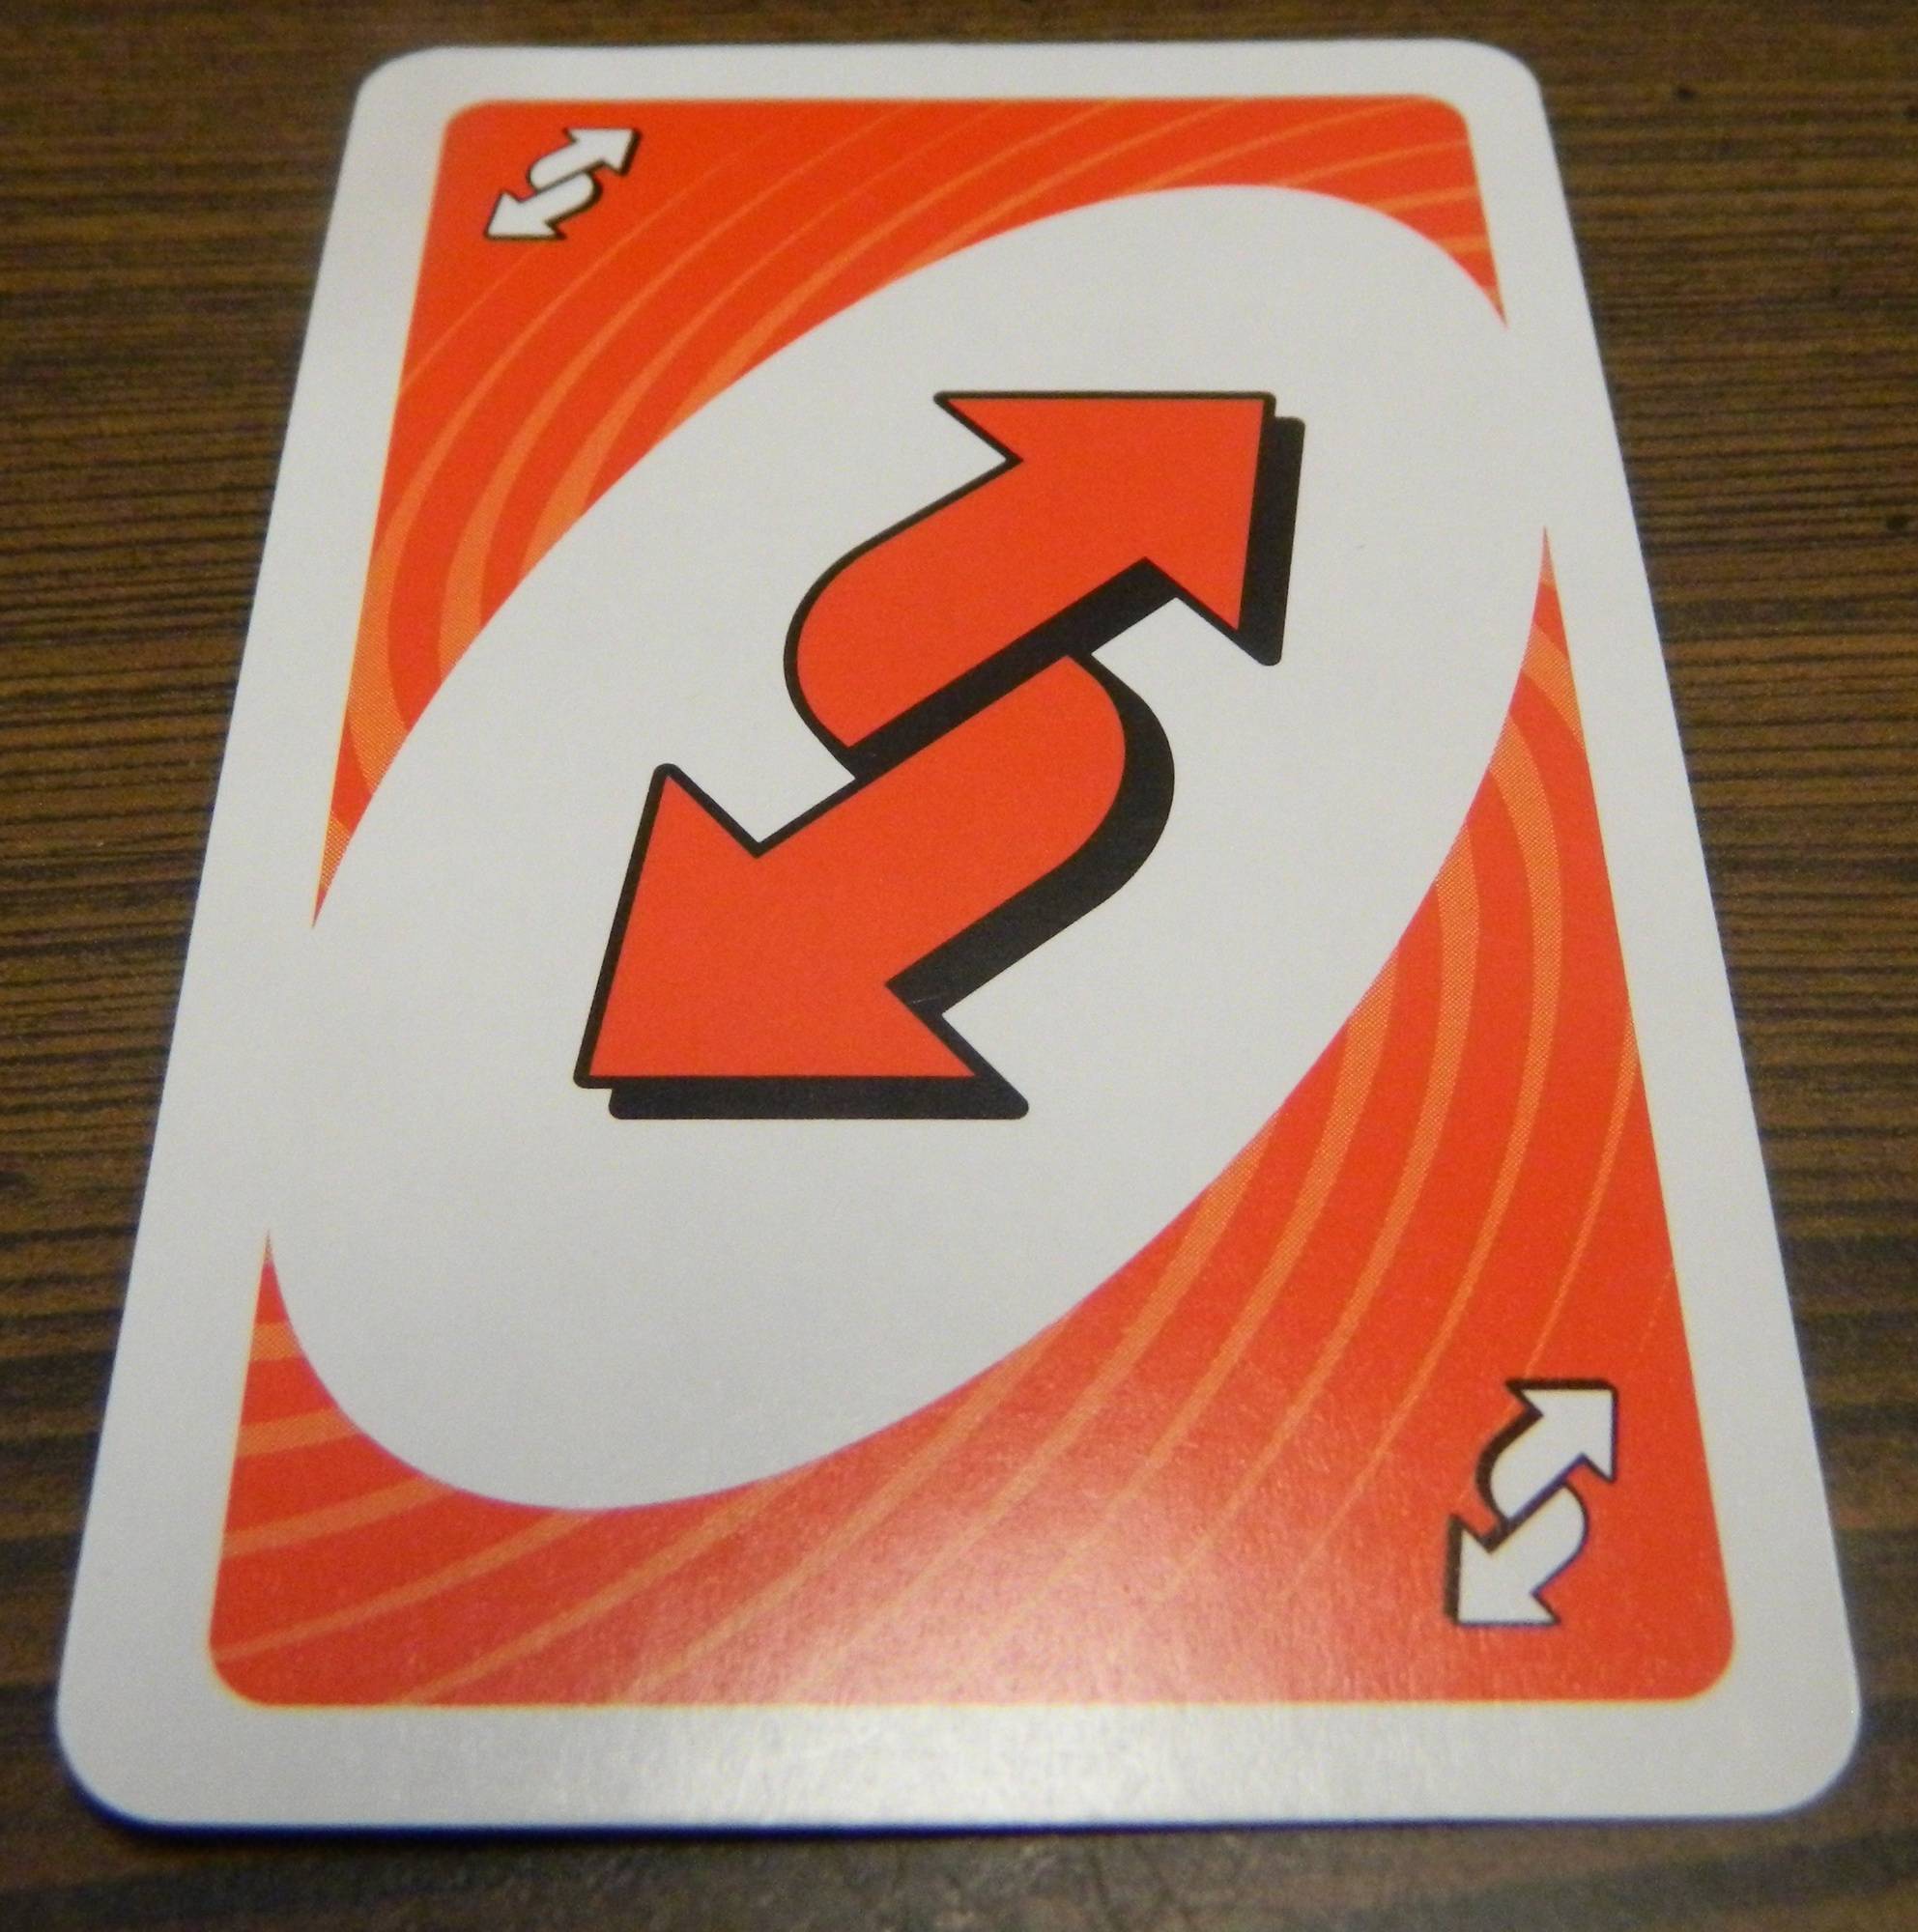 uno-cards-meaning-reversed-mamiihondenk